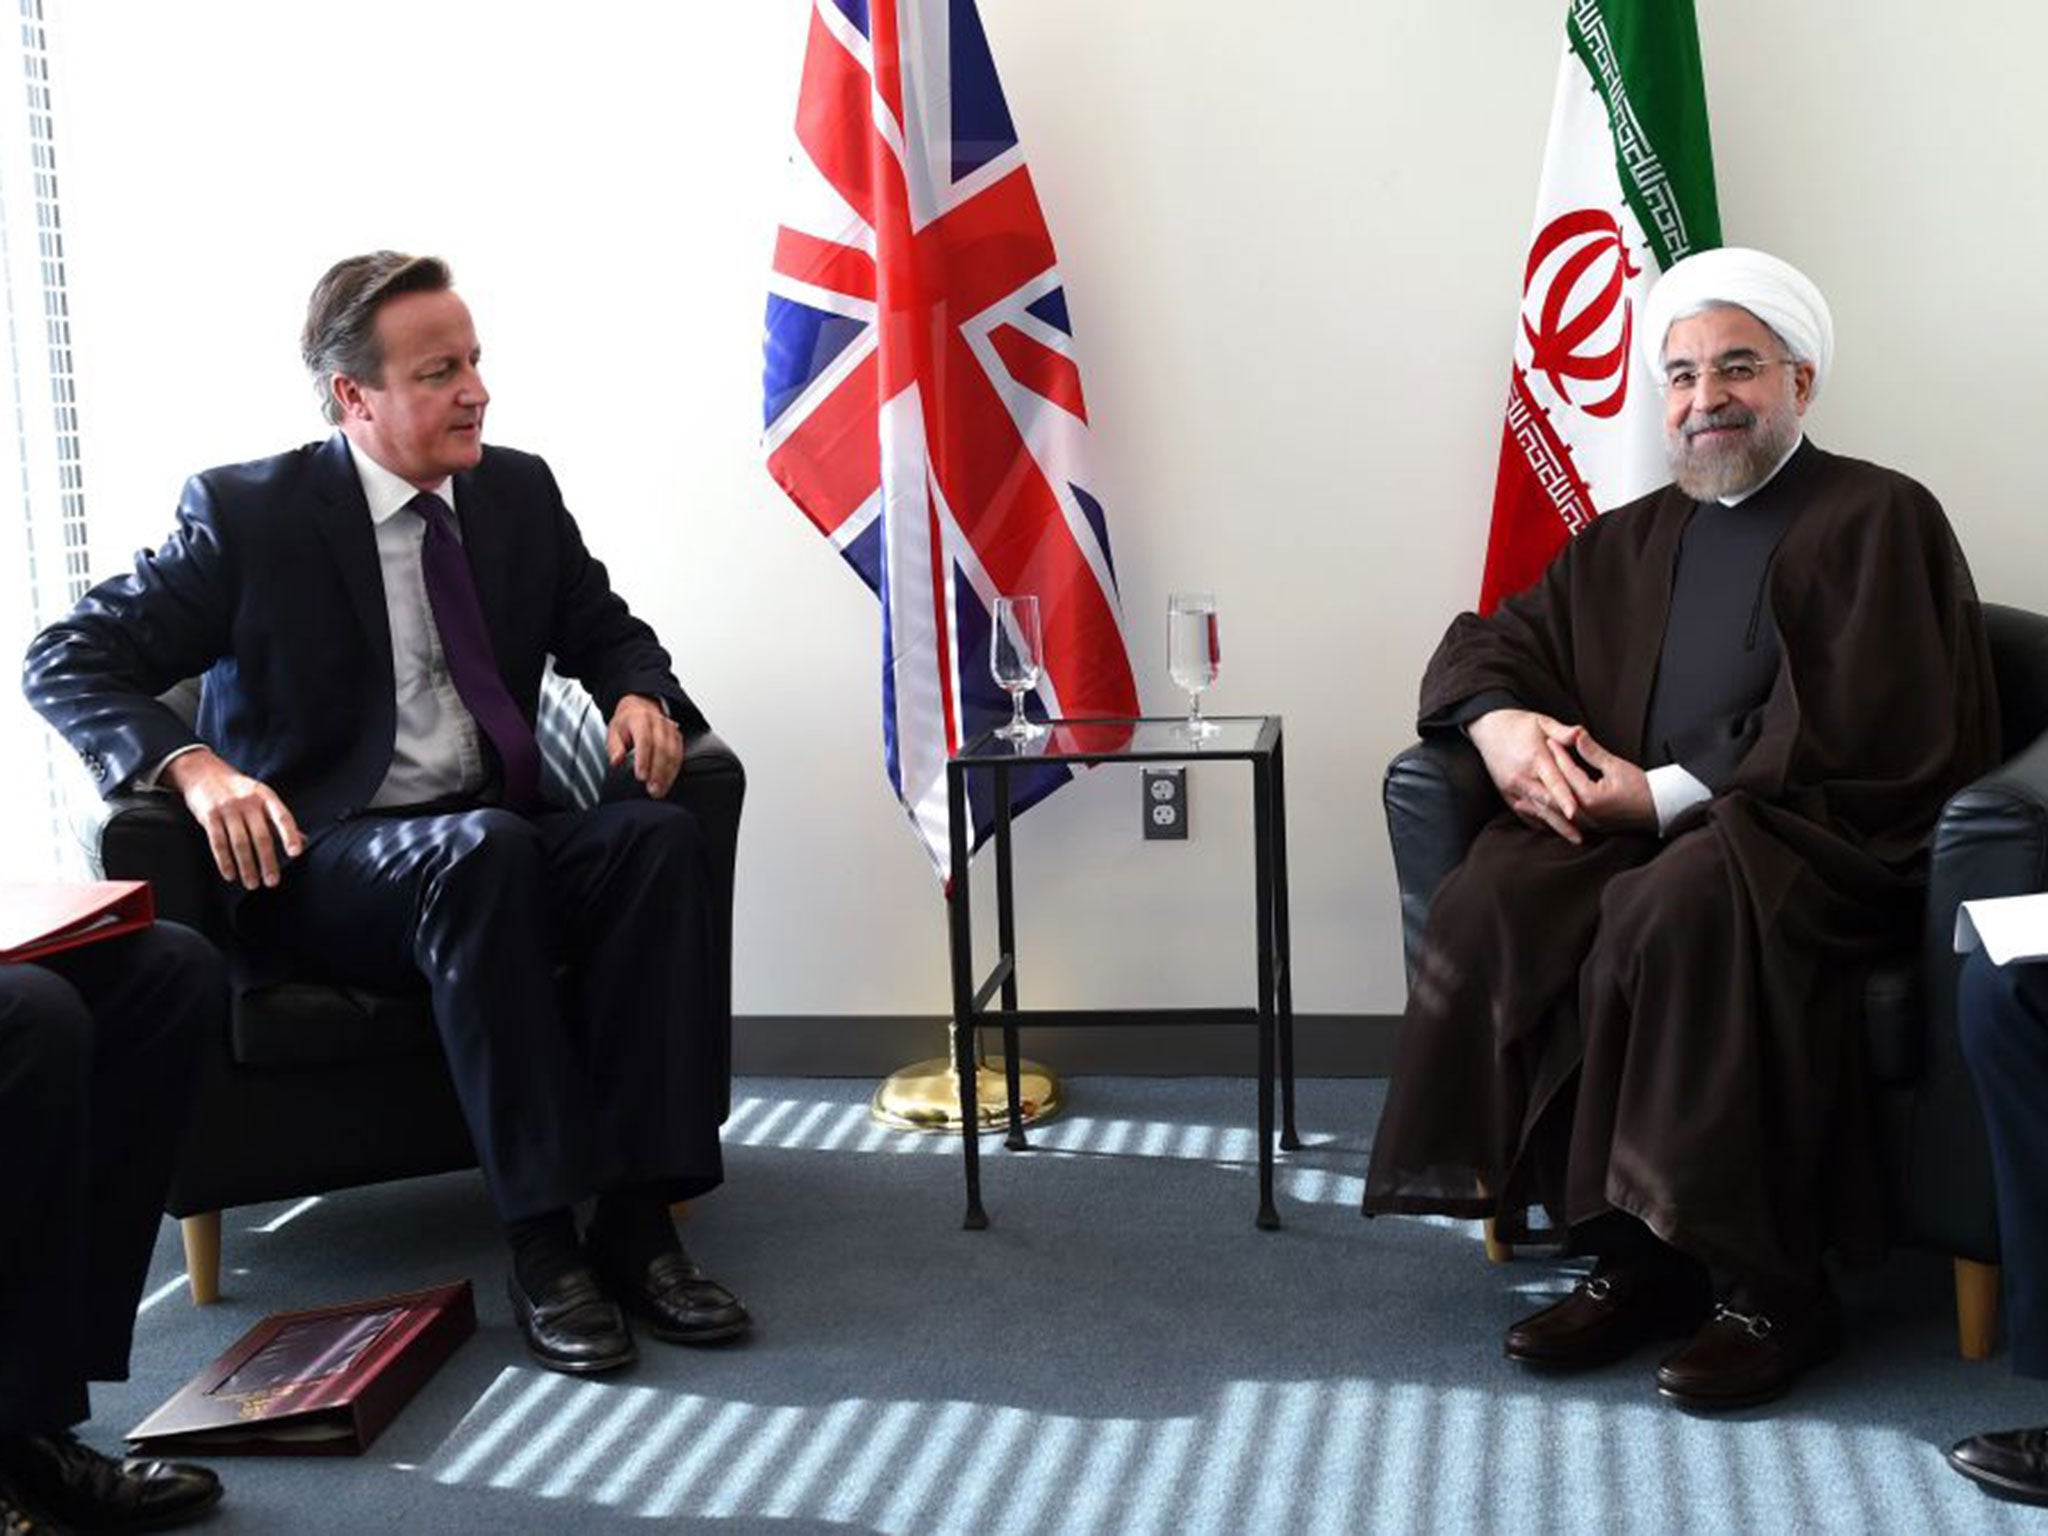 David Cameron with Iran’s President, Hassan Rouhani, at the UN General Assembly in New York last year